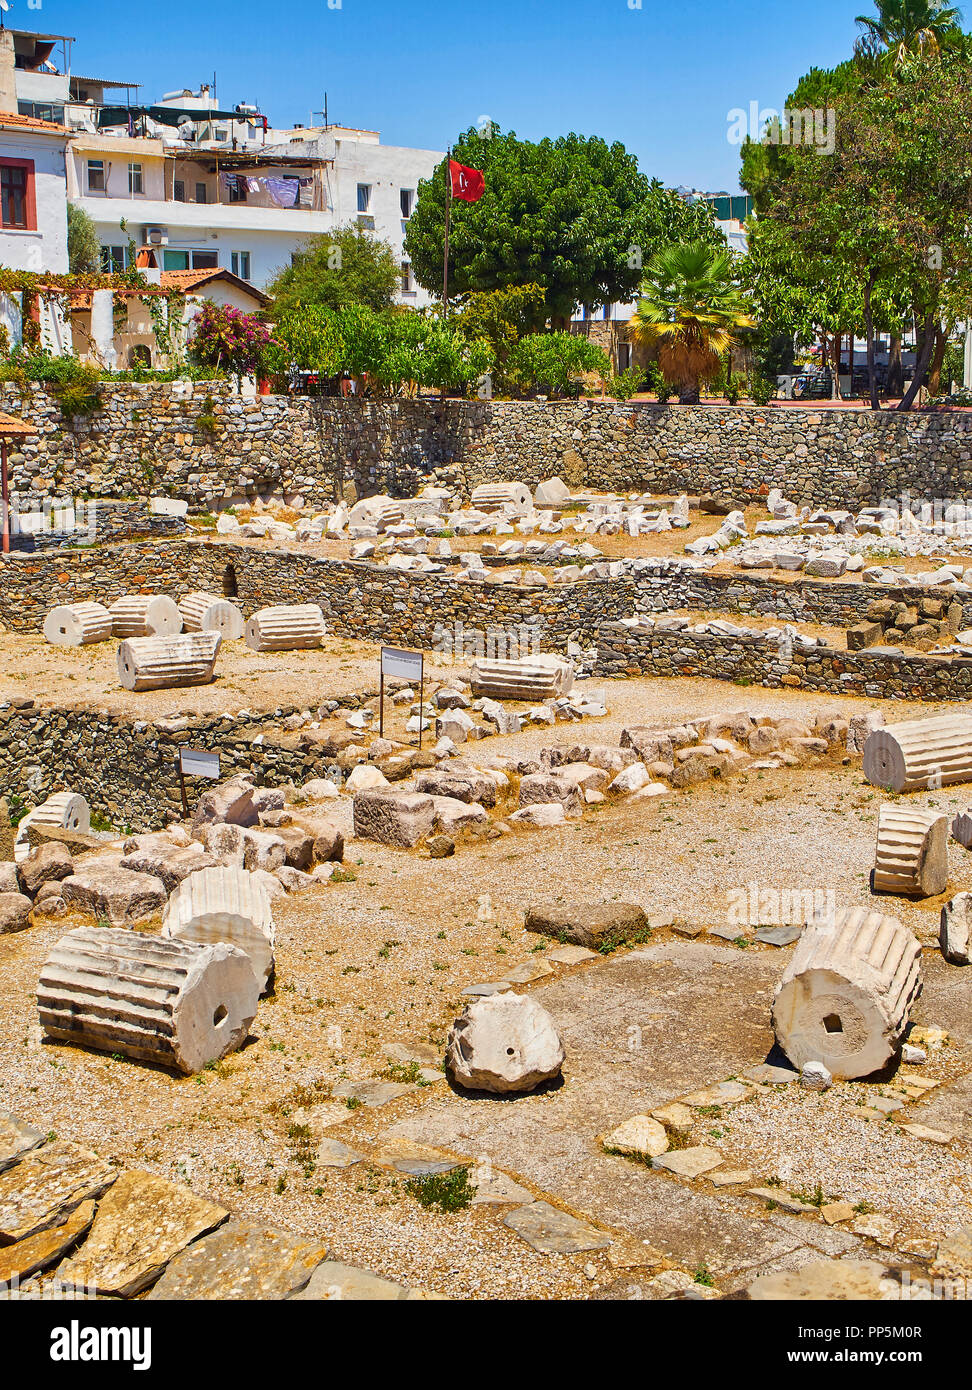 The ruins of the Mausoleum of Halicarnassus, one of the Seven Wonders of the World. Bodrum, Mugla Province, Turkey. Stock Photo